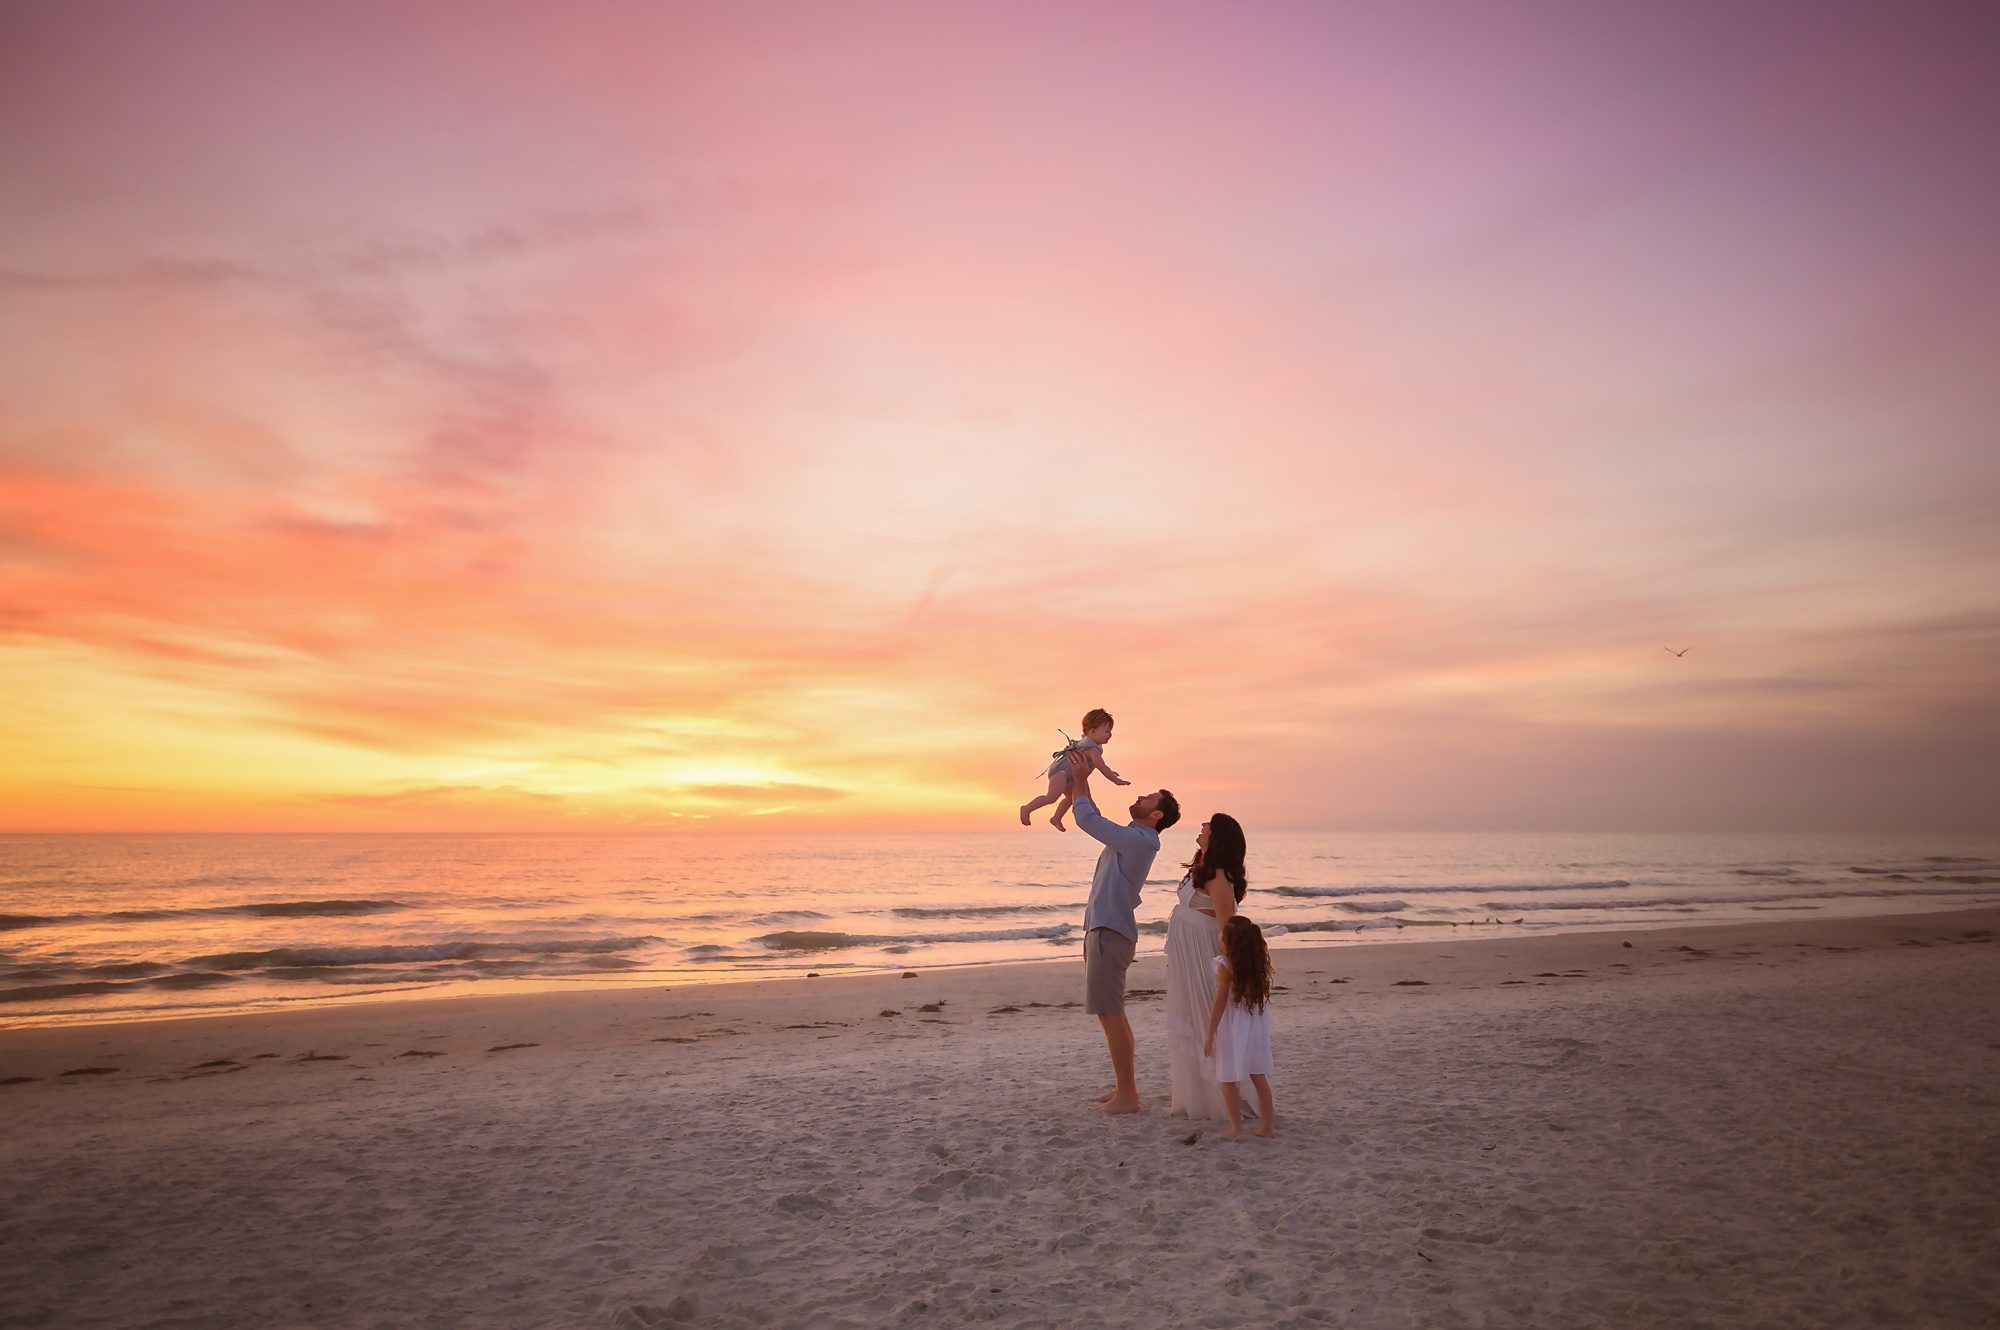 Family of four gets beach maternity portraits at sunset to celebrate their 3rd child on the way. 